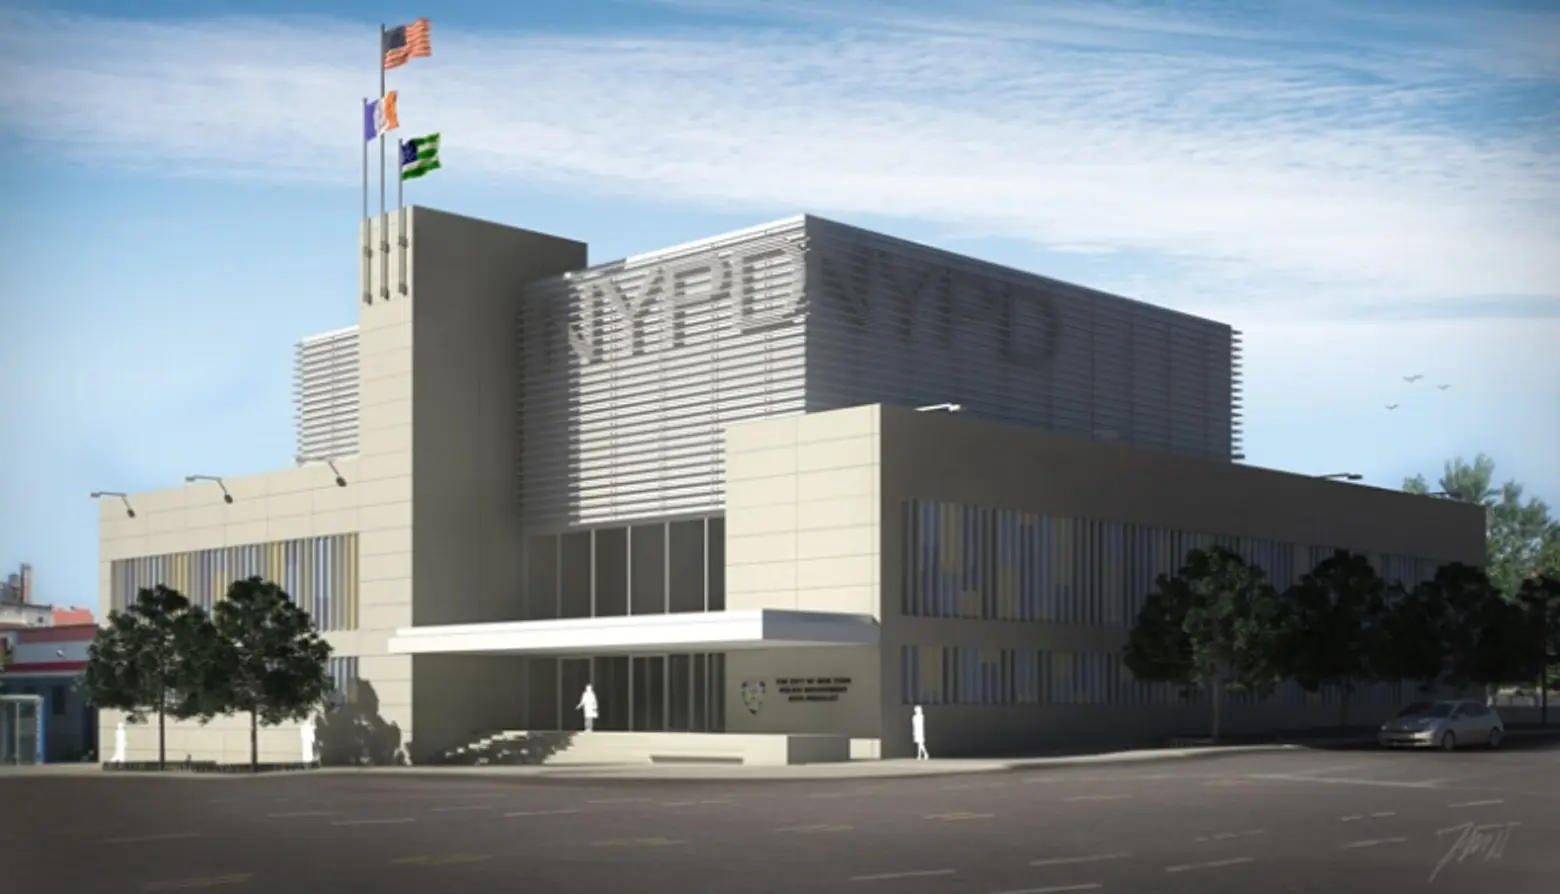 NYPD 40th Precinct station house, Karlsberger, Department of Design and Construction